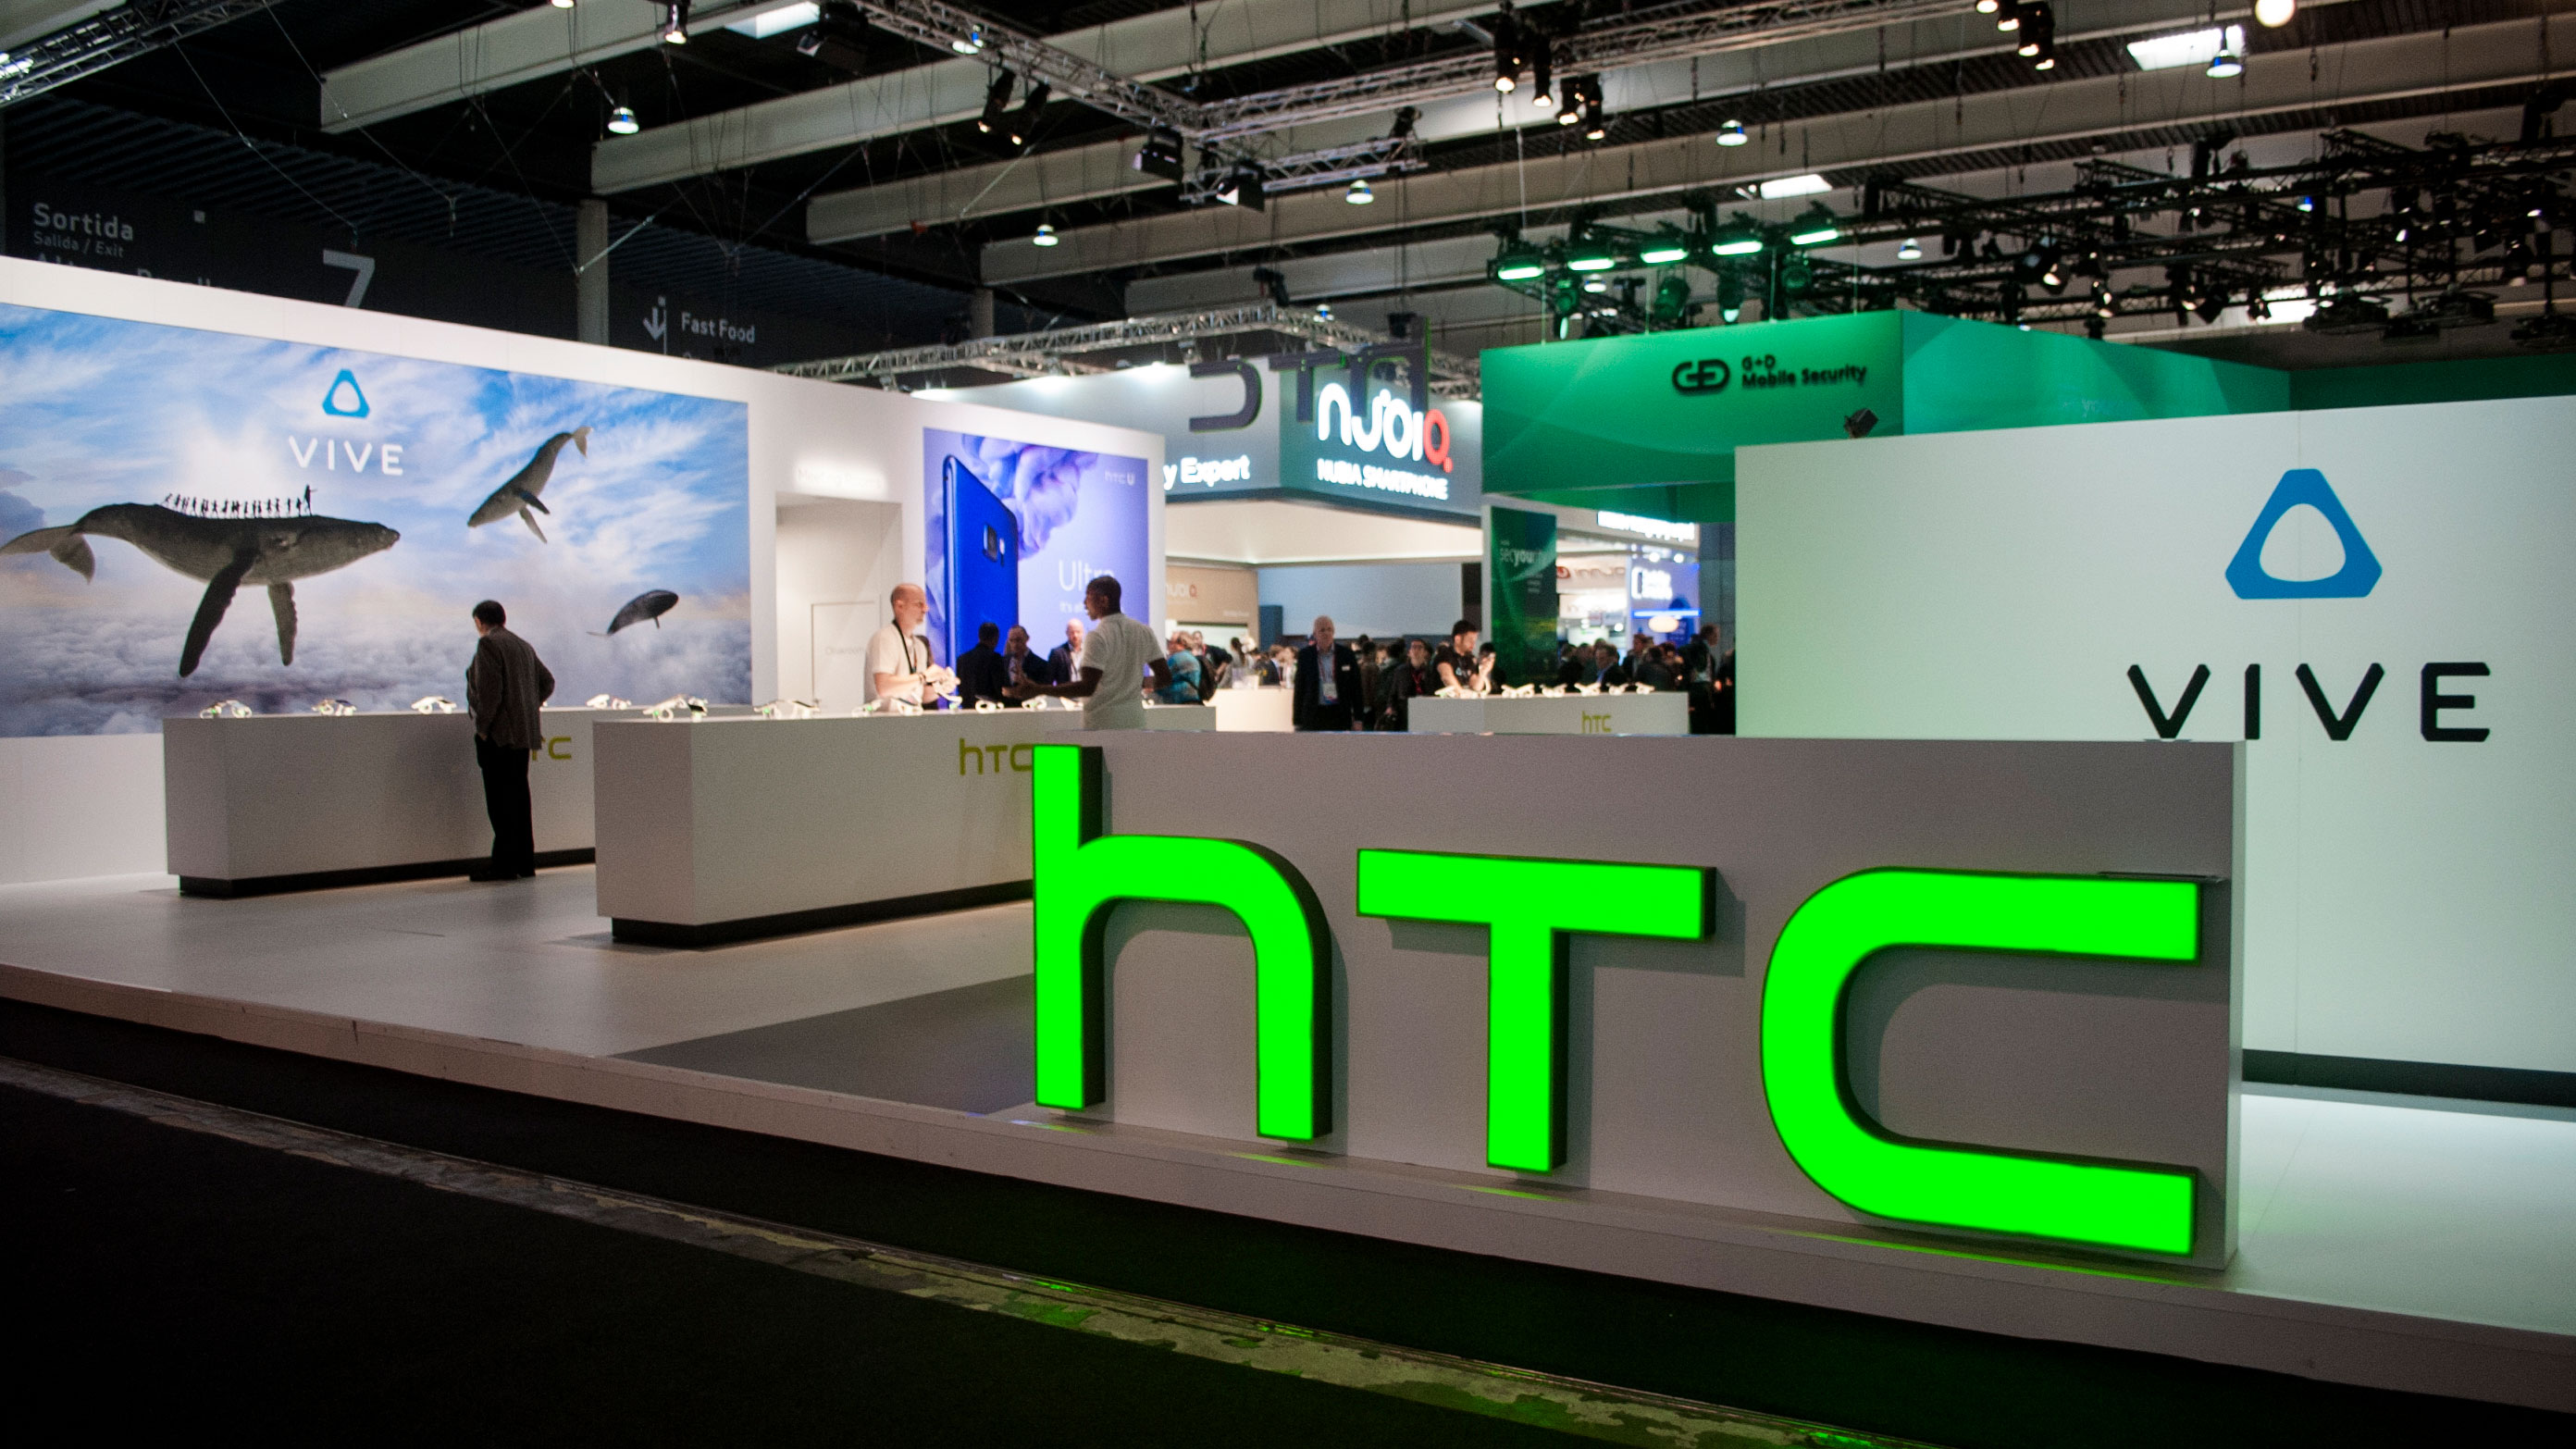 Google completes its $1.1B deal to buy a chunk of HTC's smartphone